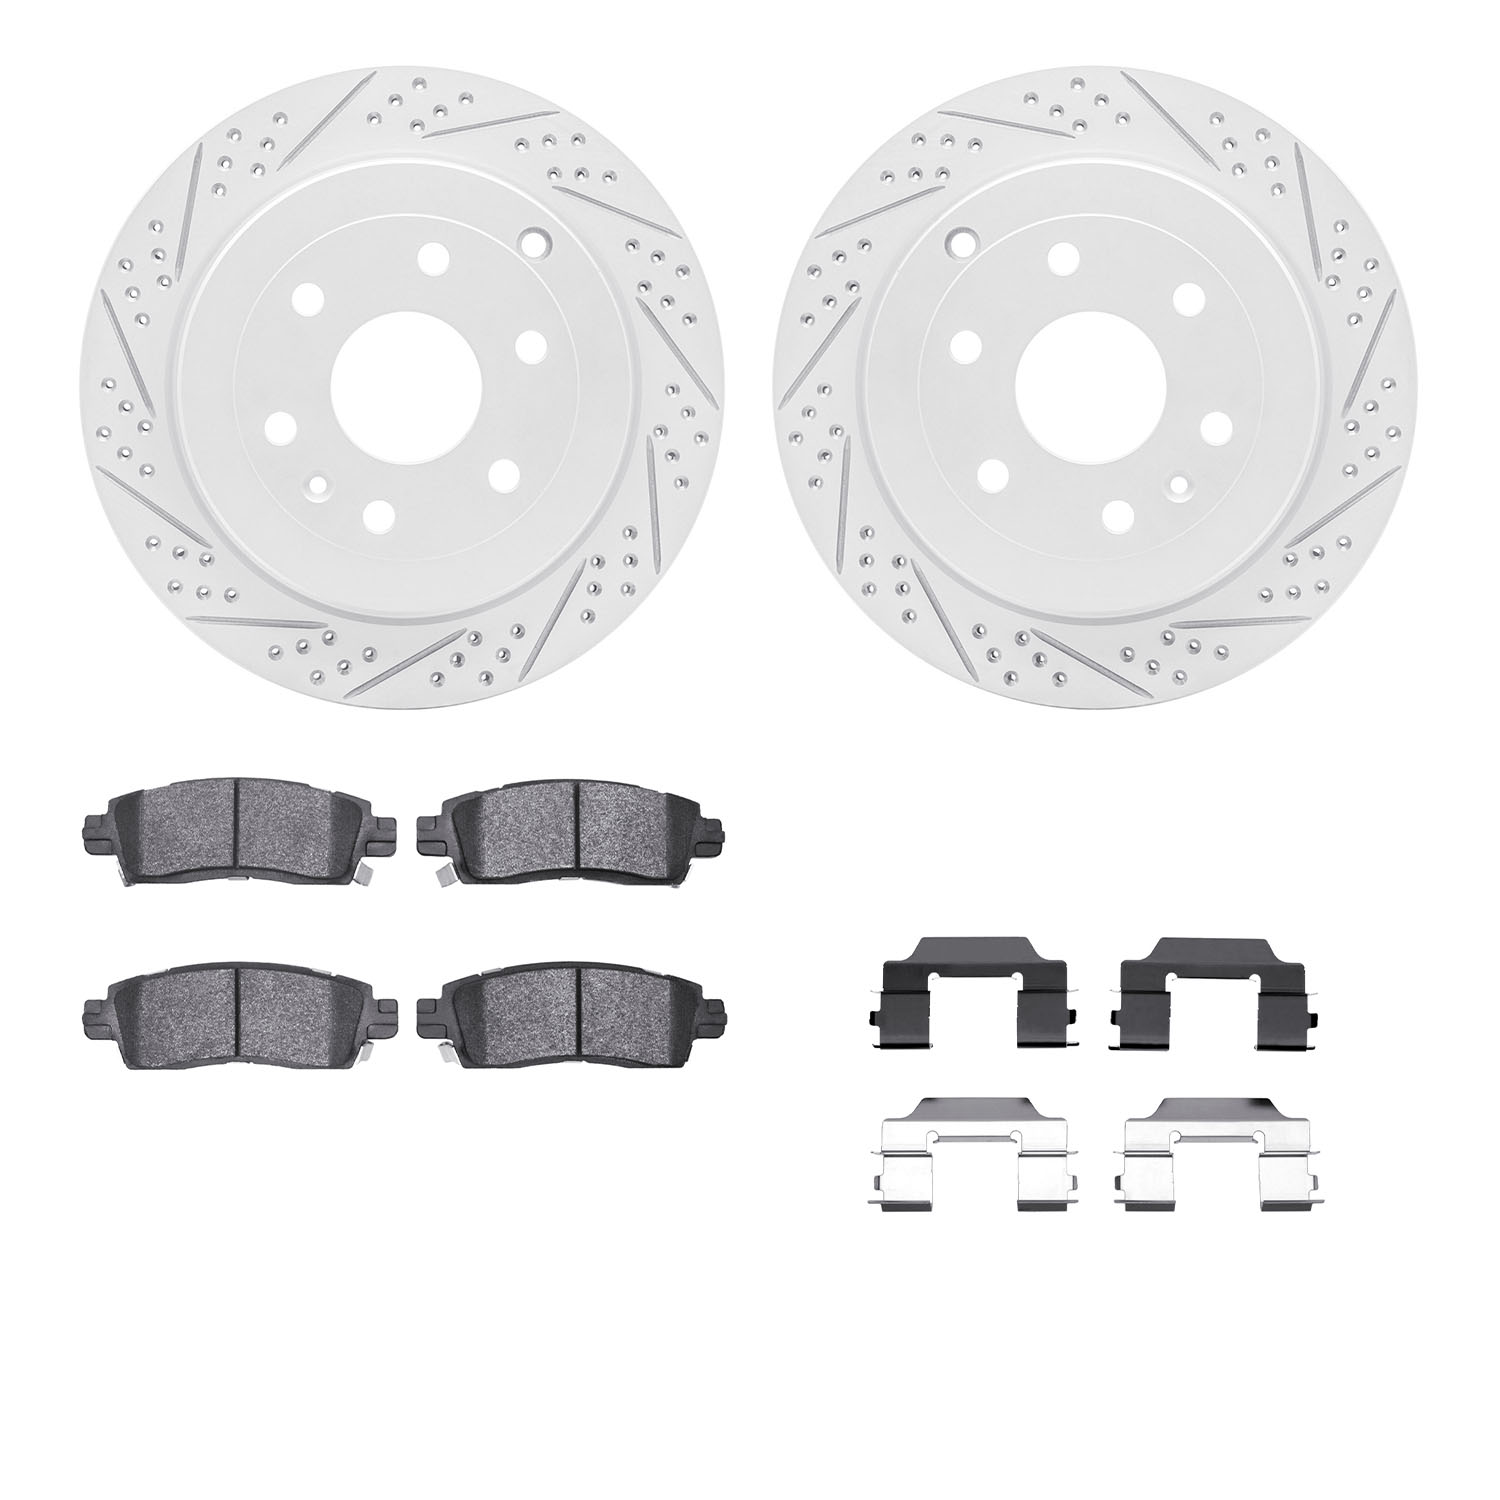 2212-48064 Geoperformance Drilled/Slotted Rotors w/Heavy-Duty Pads Kit & Hardware, 2007-2017 GM, Position: Rear